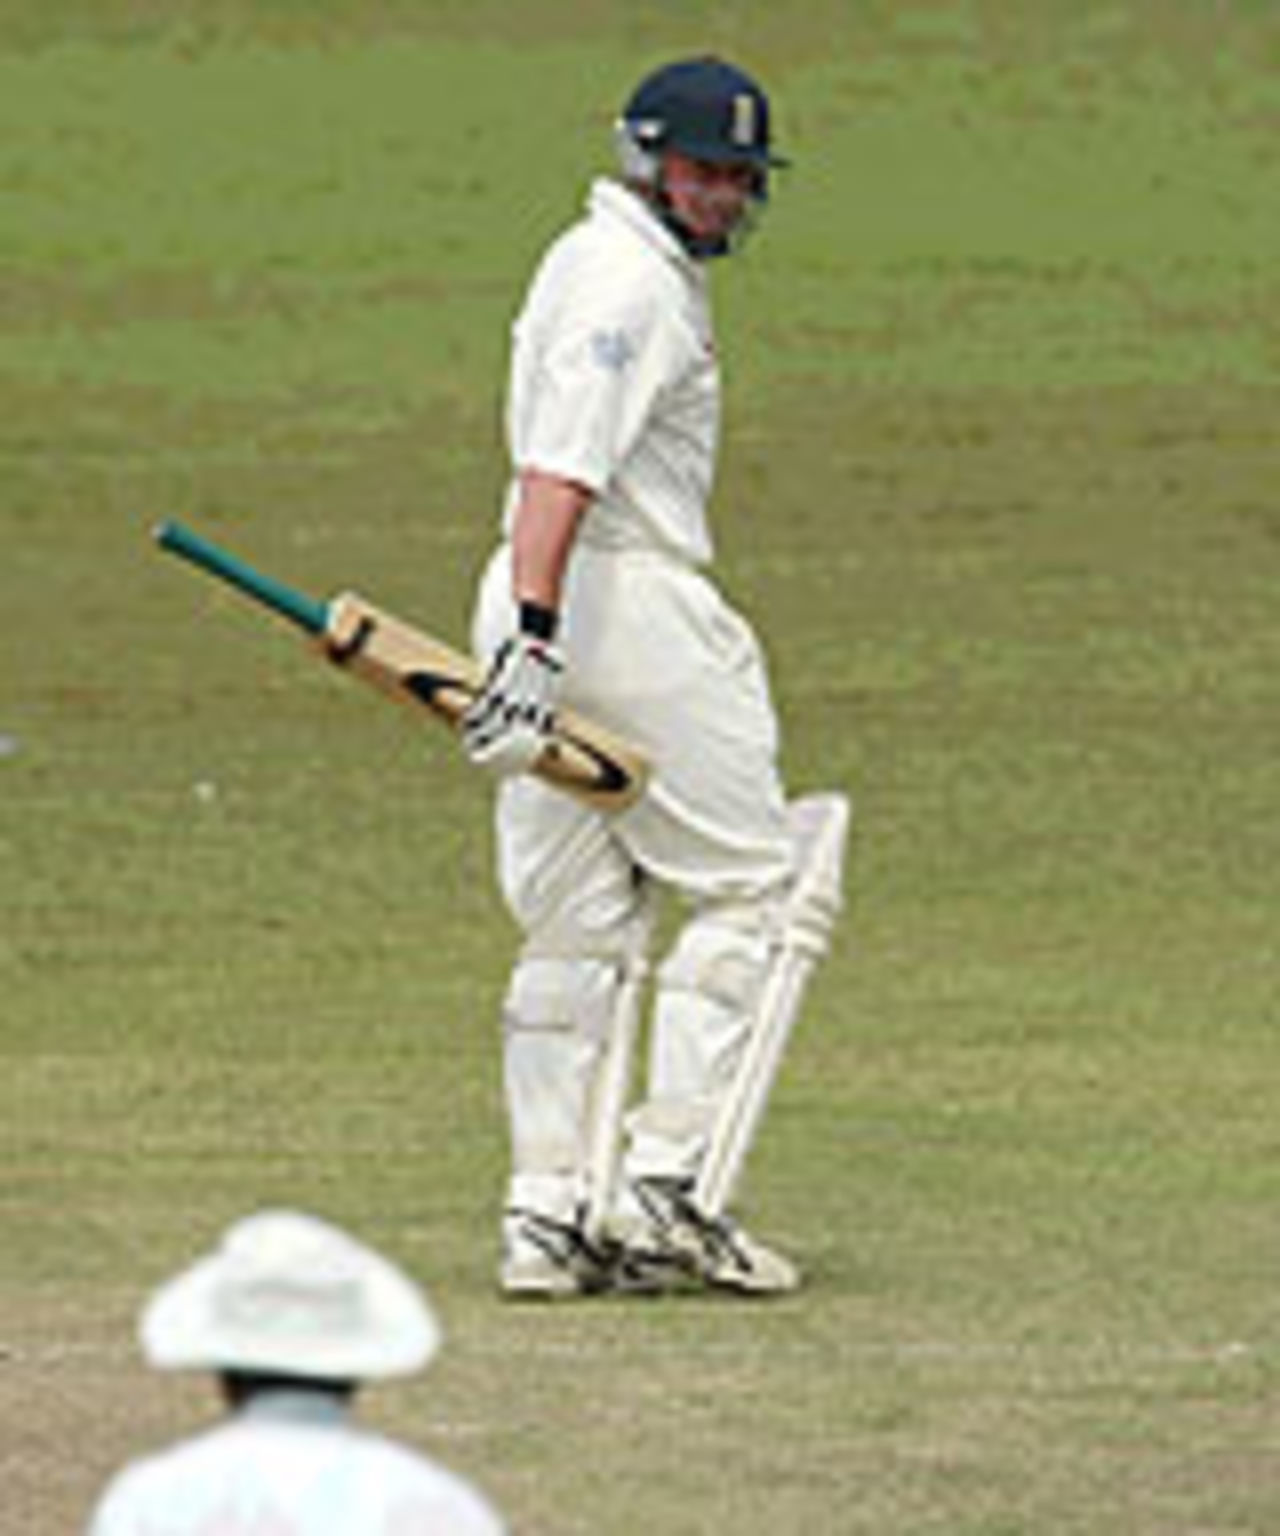 Robert Croft looks back in anger after falling lbw on the final day of England's warm-up against a Sri Lankan President's XI, Colombo, November 28, 2003